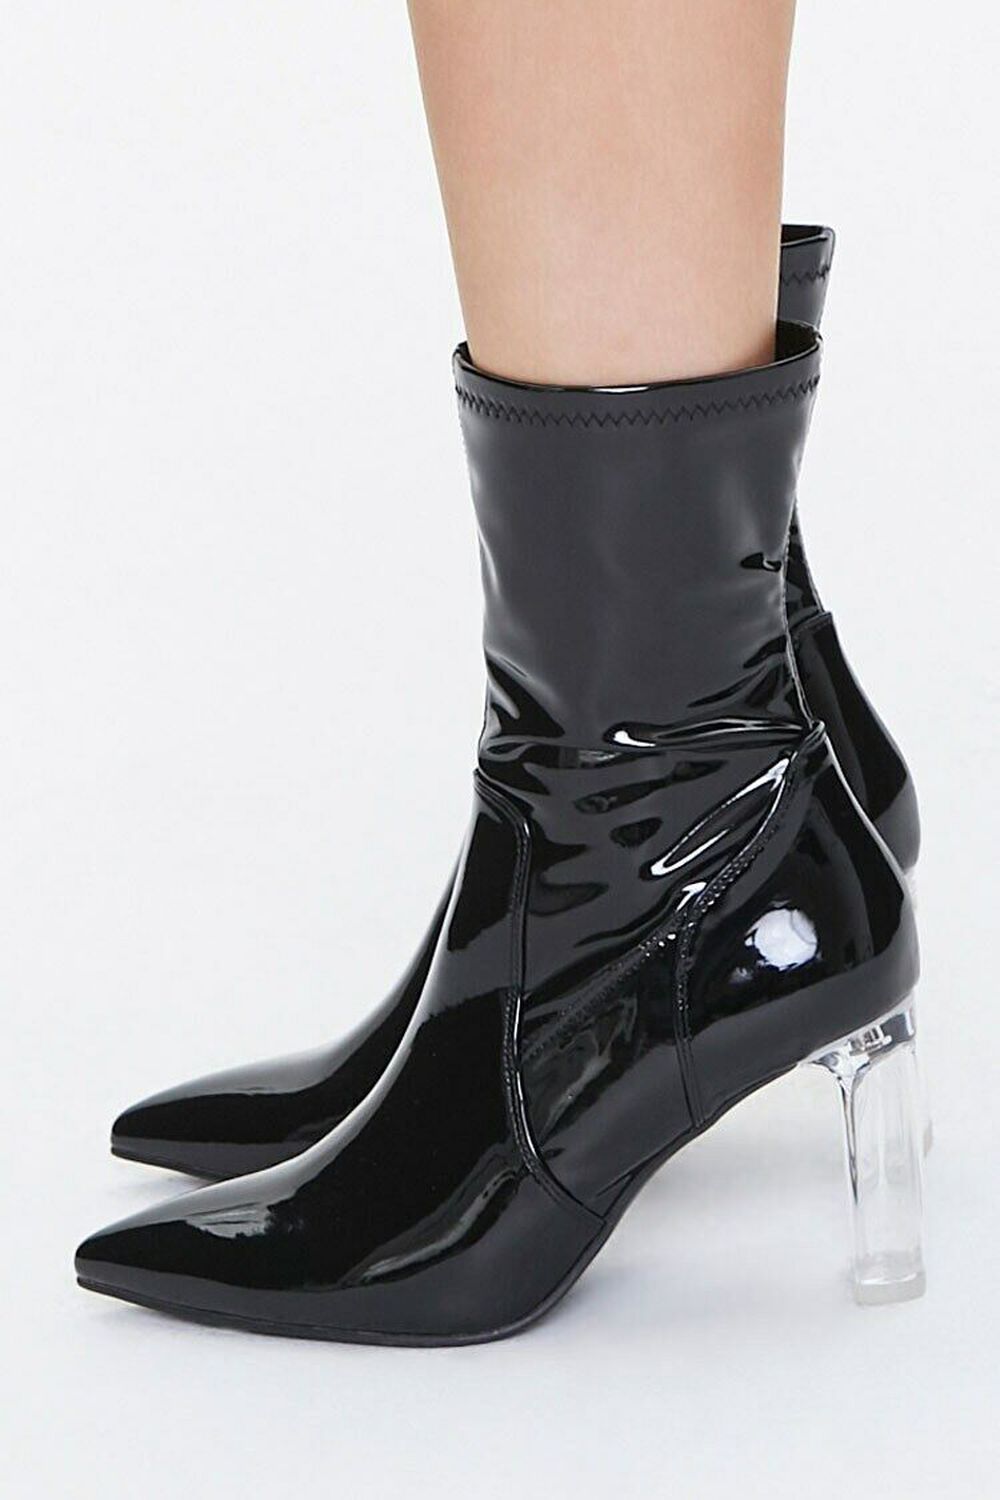 Faux Patent Leather Lucite Heel Booties